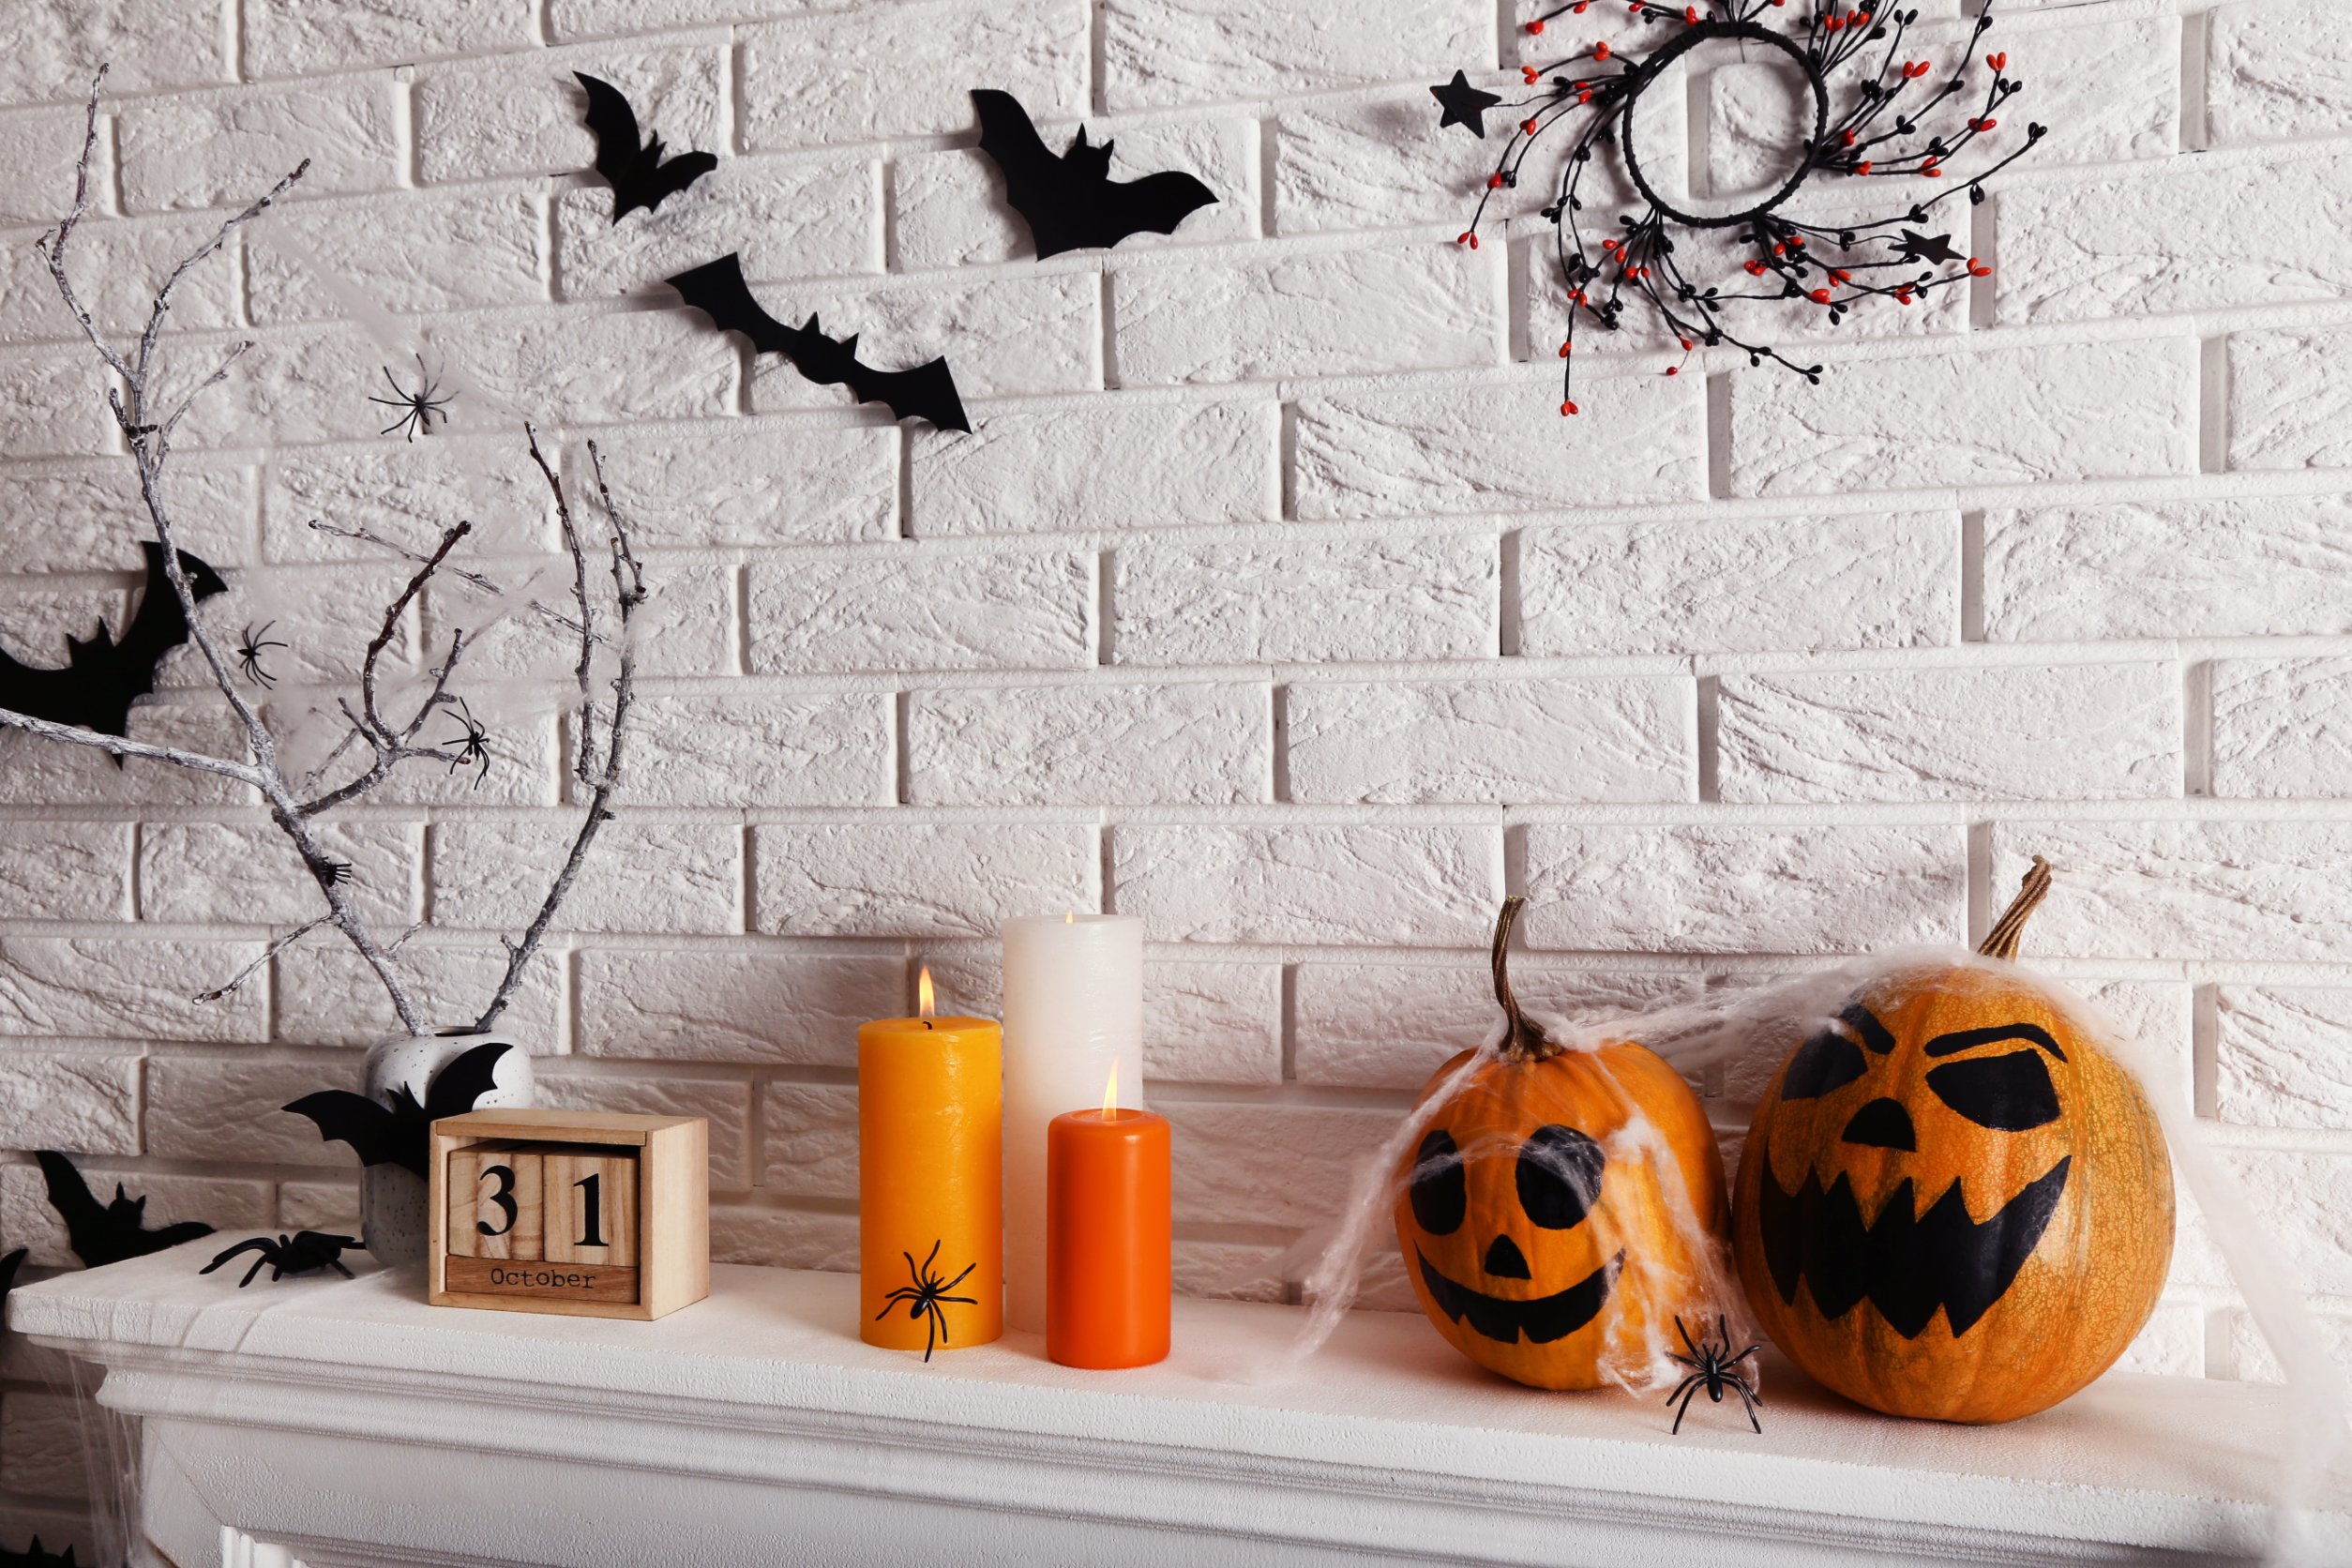 Fireplace with Halloween decorations.